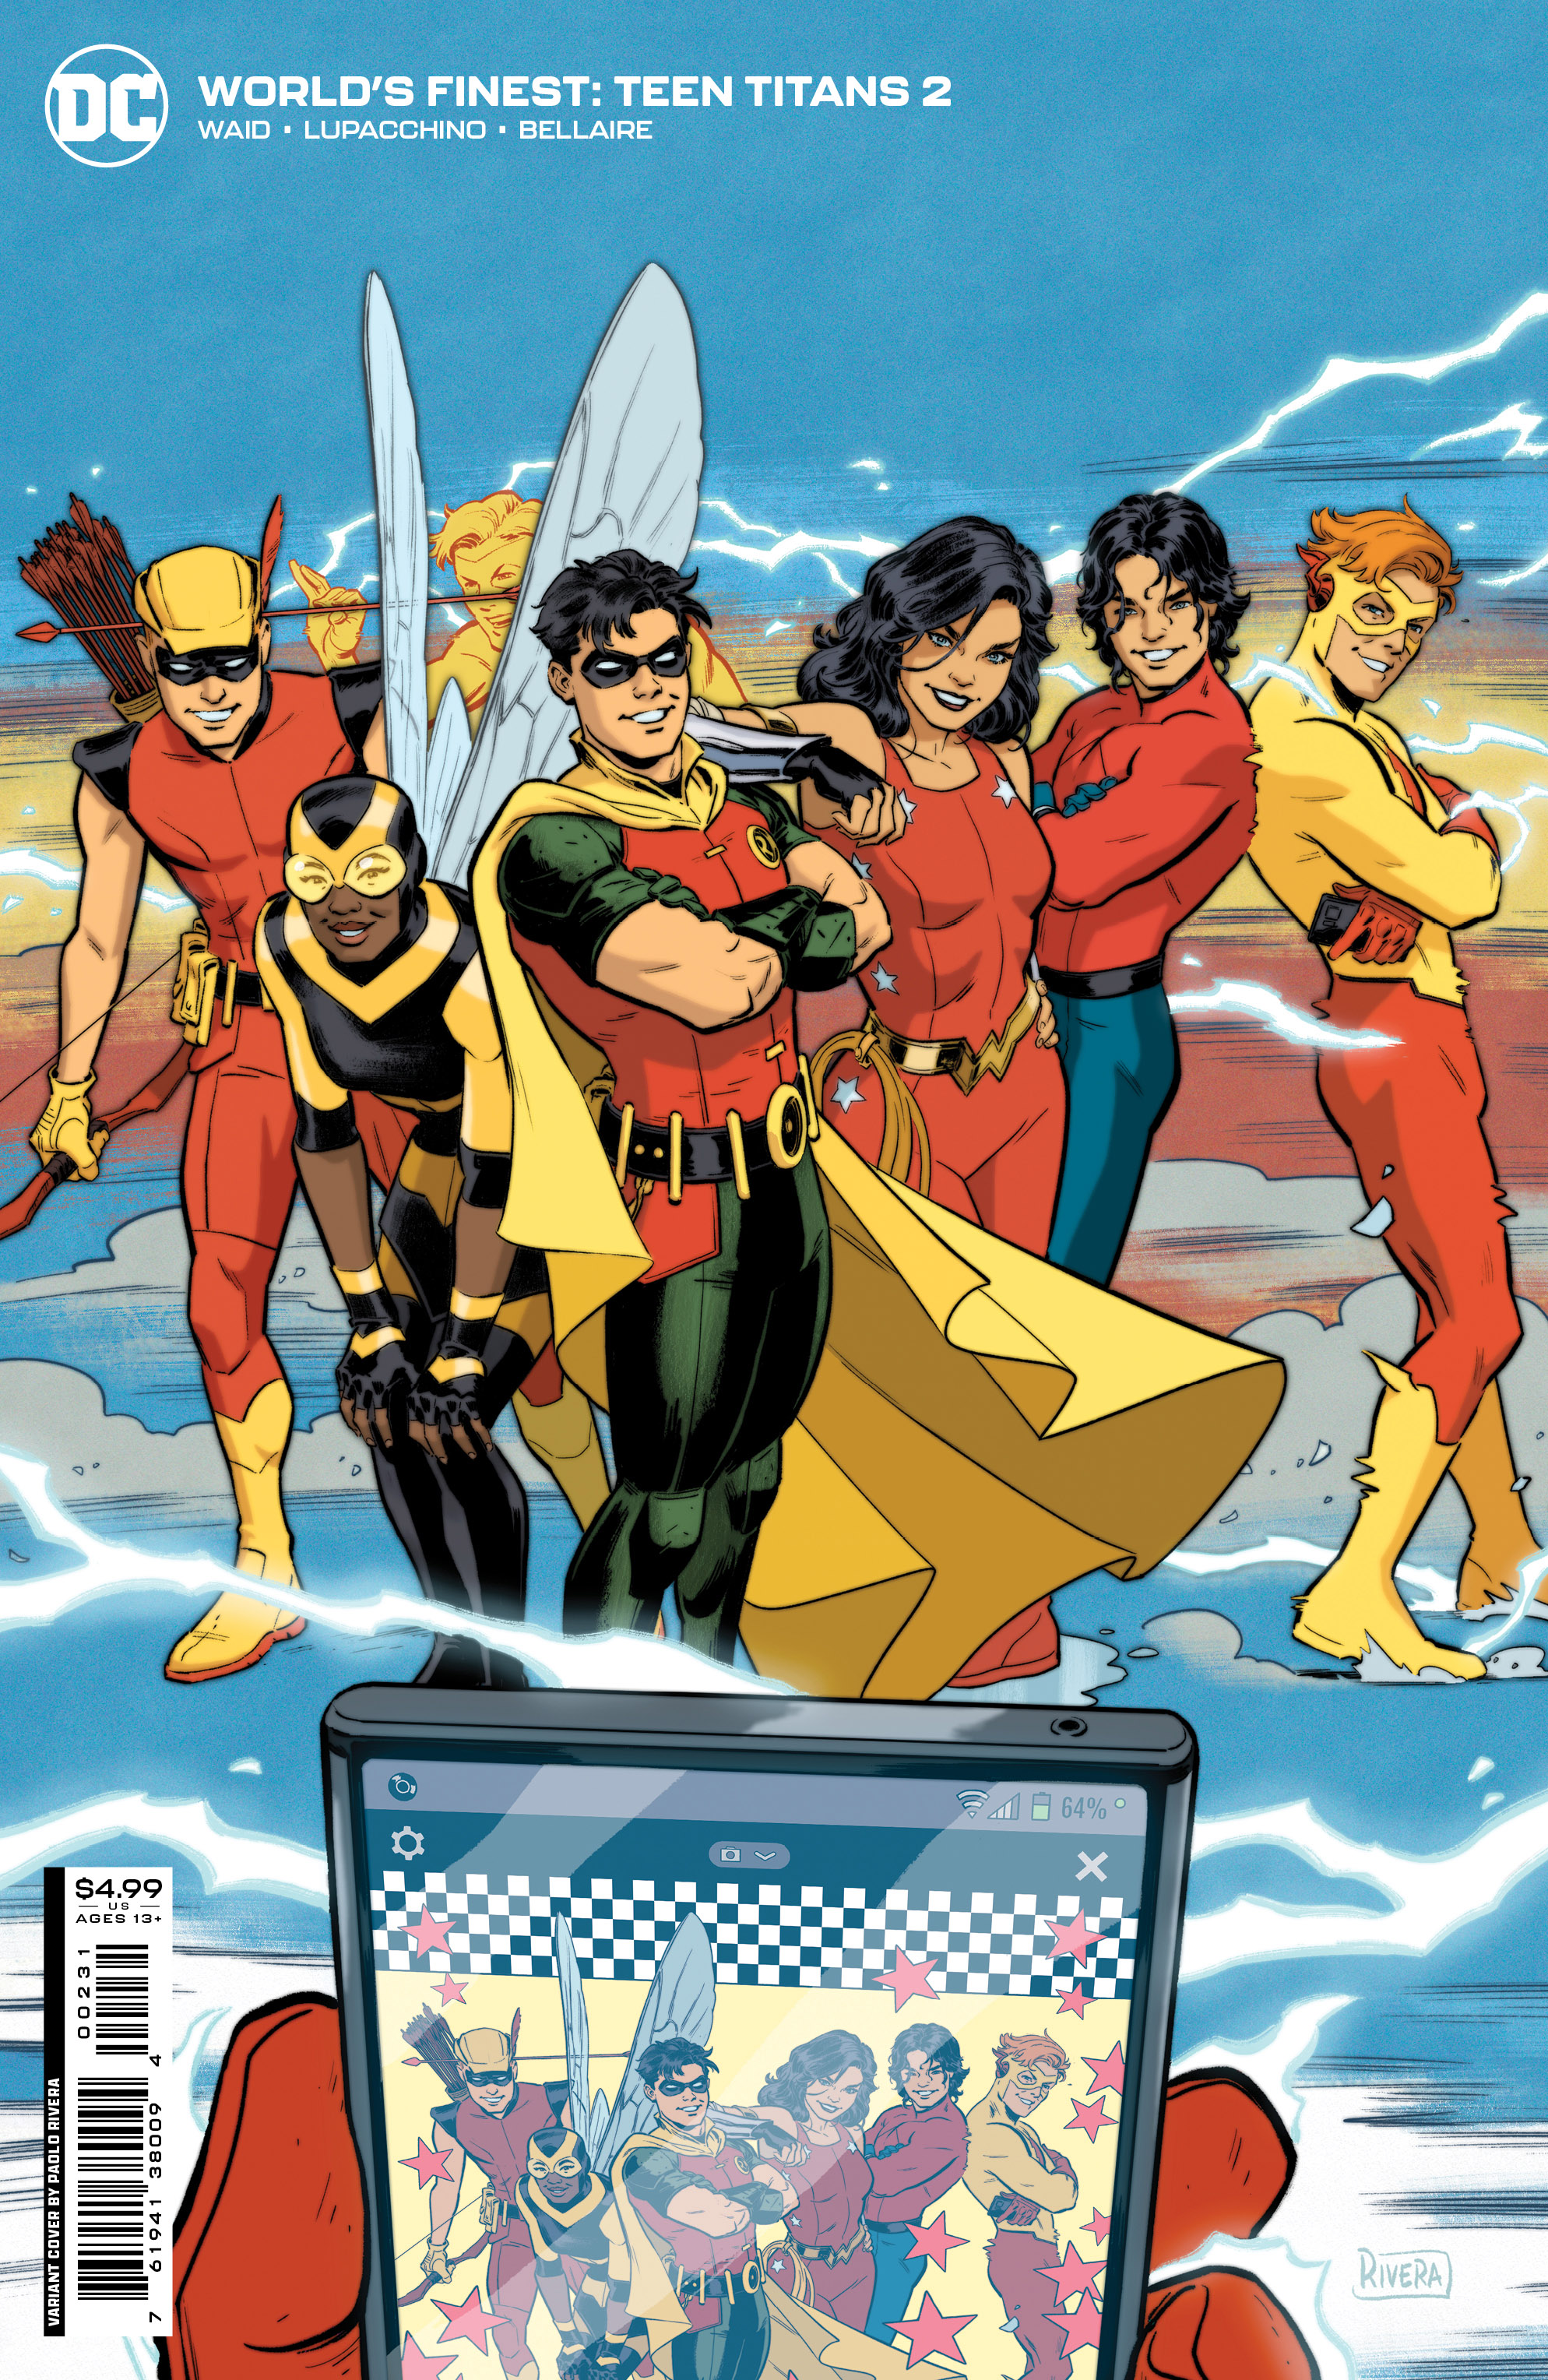 Worlds Finest Teen Titans #2 Cover C Paolo Rivera Card Stock Variant (Of 6)